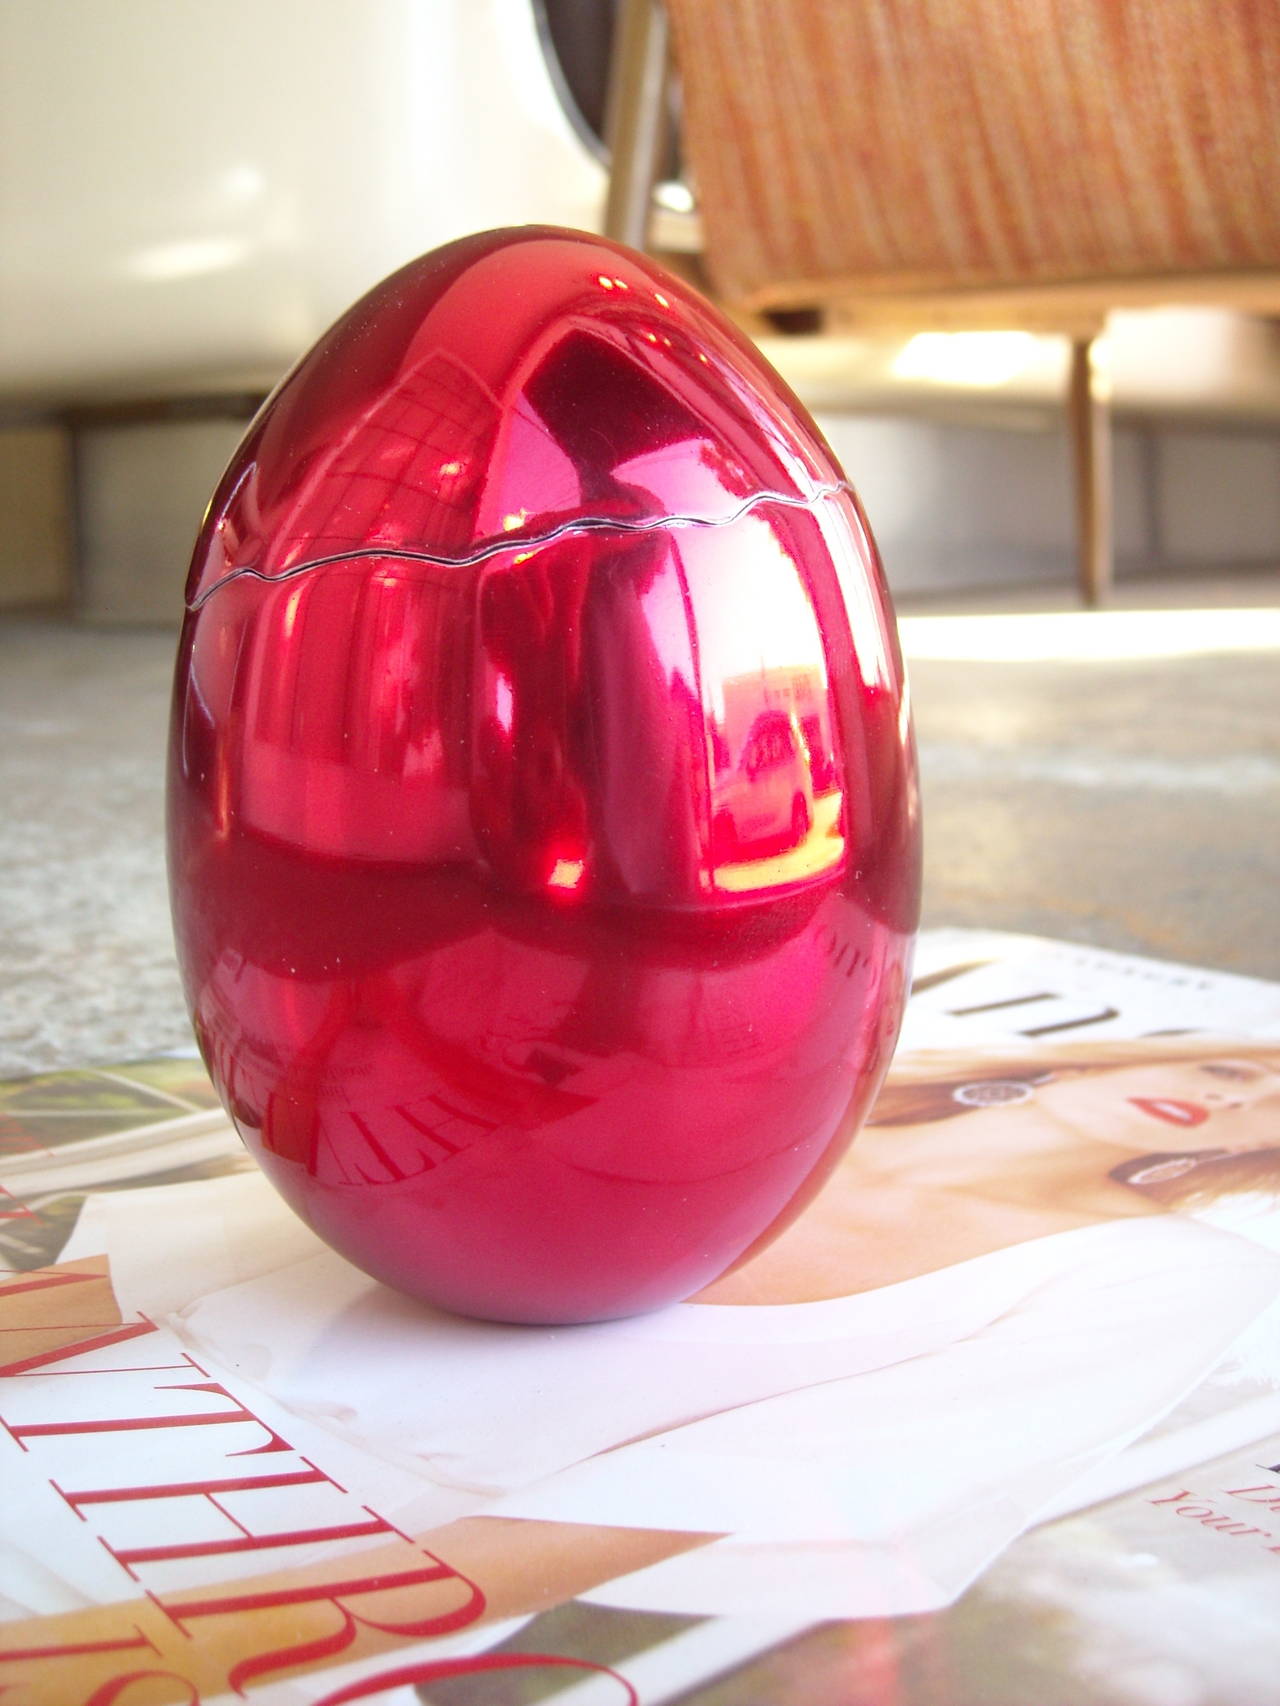 This egg was made for the opening of Broad Contemporary Art Museum at LACMA in 2008. Colored anodized aluminum. The egg has some light scratches that we took pictures with the best details we could.